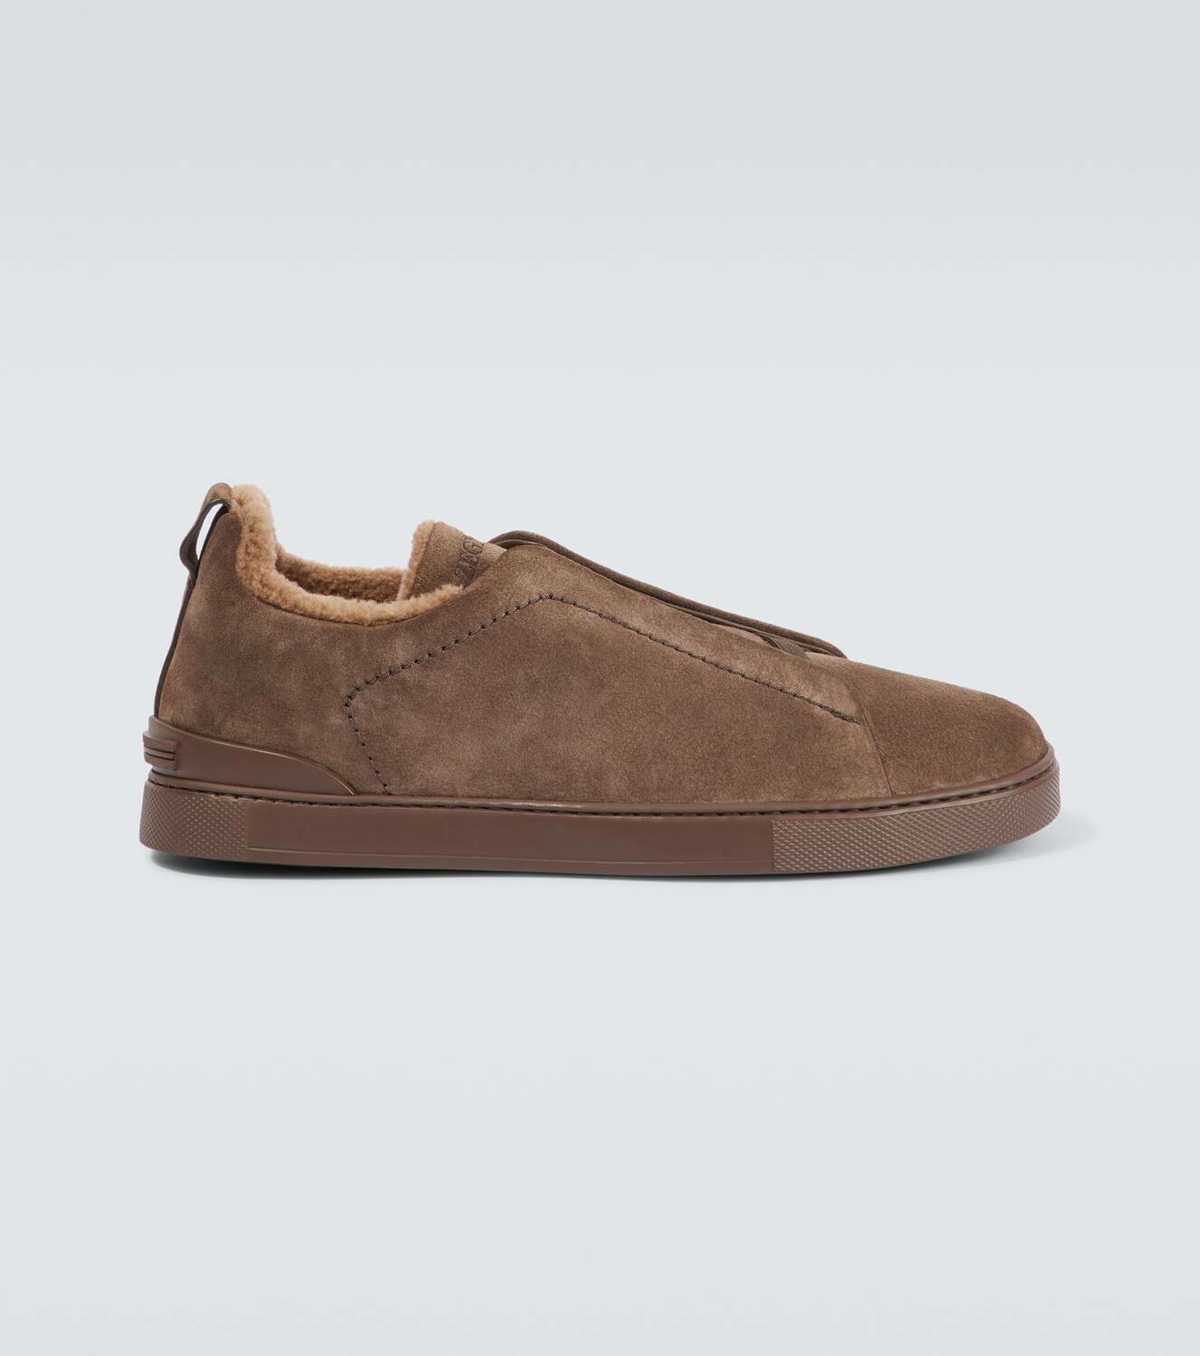 Zegna Triple Stitch shearling-lined suede sneakers Zegna